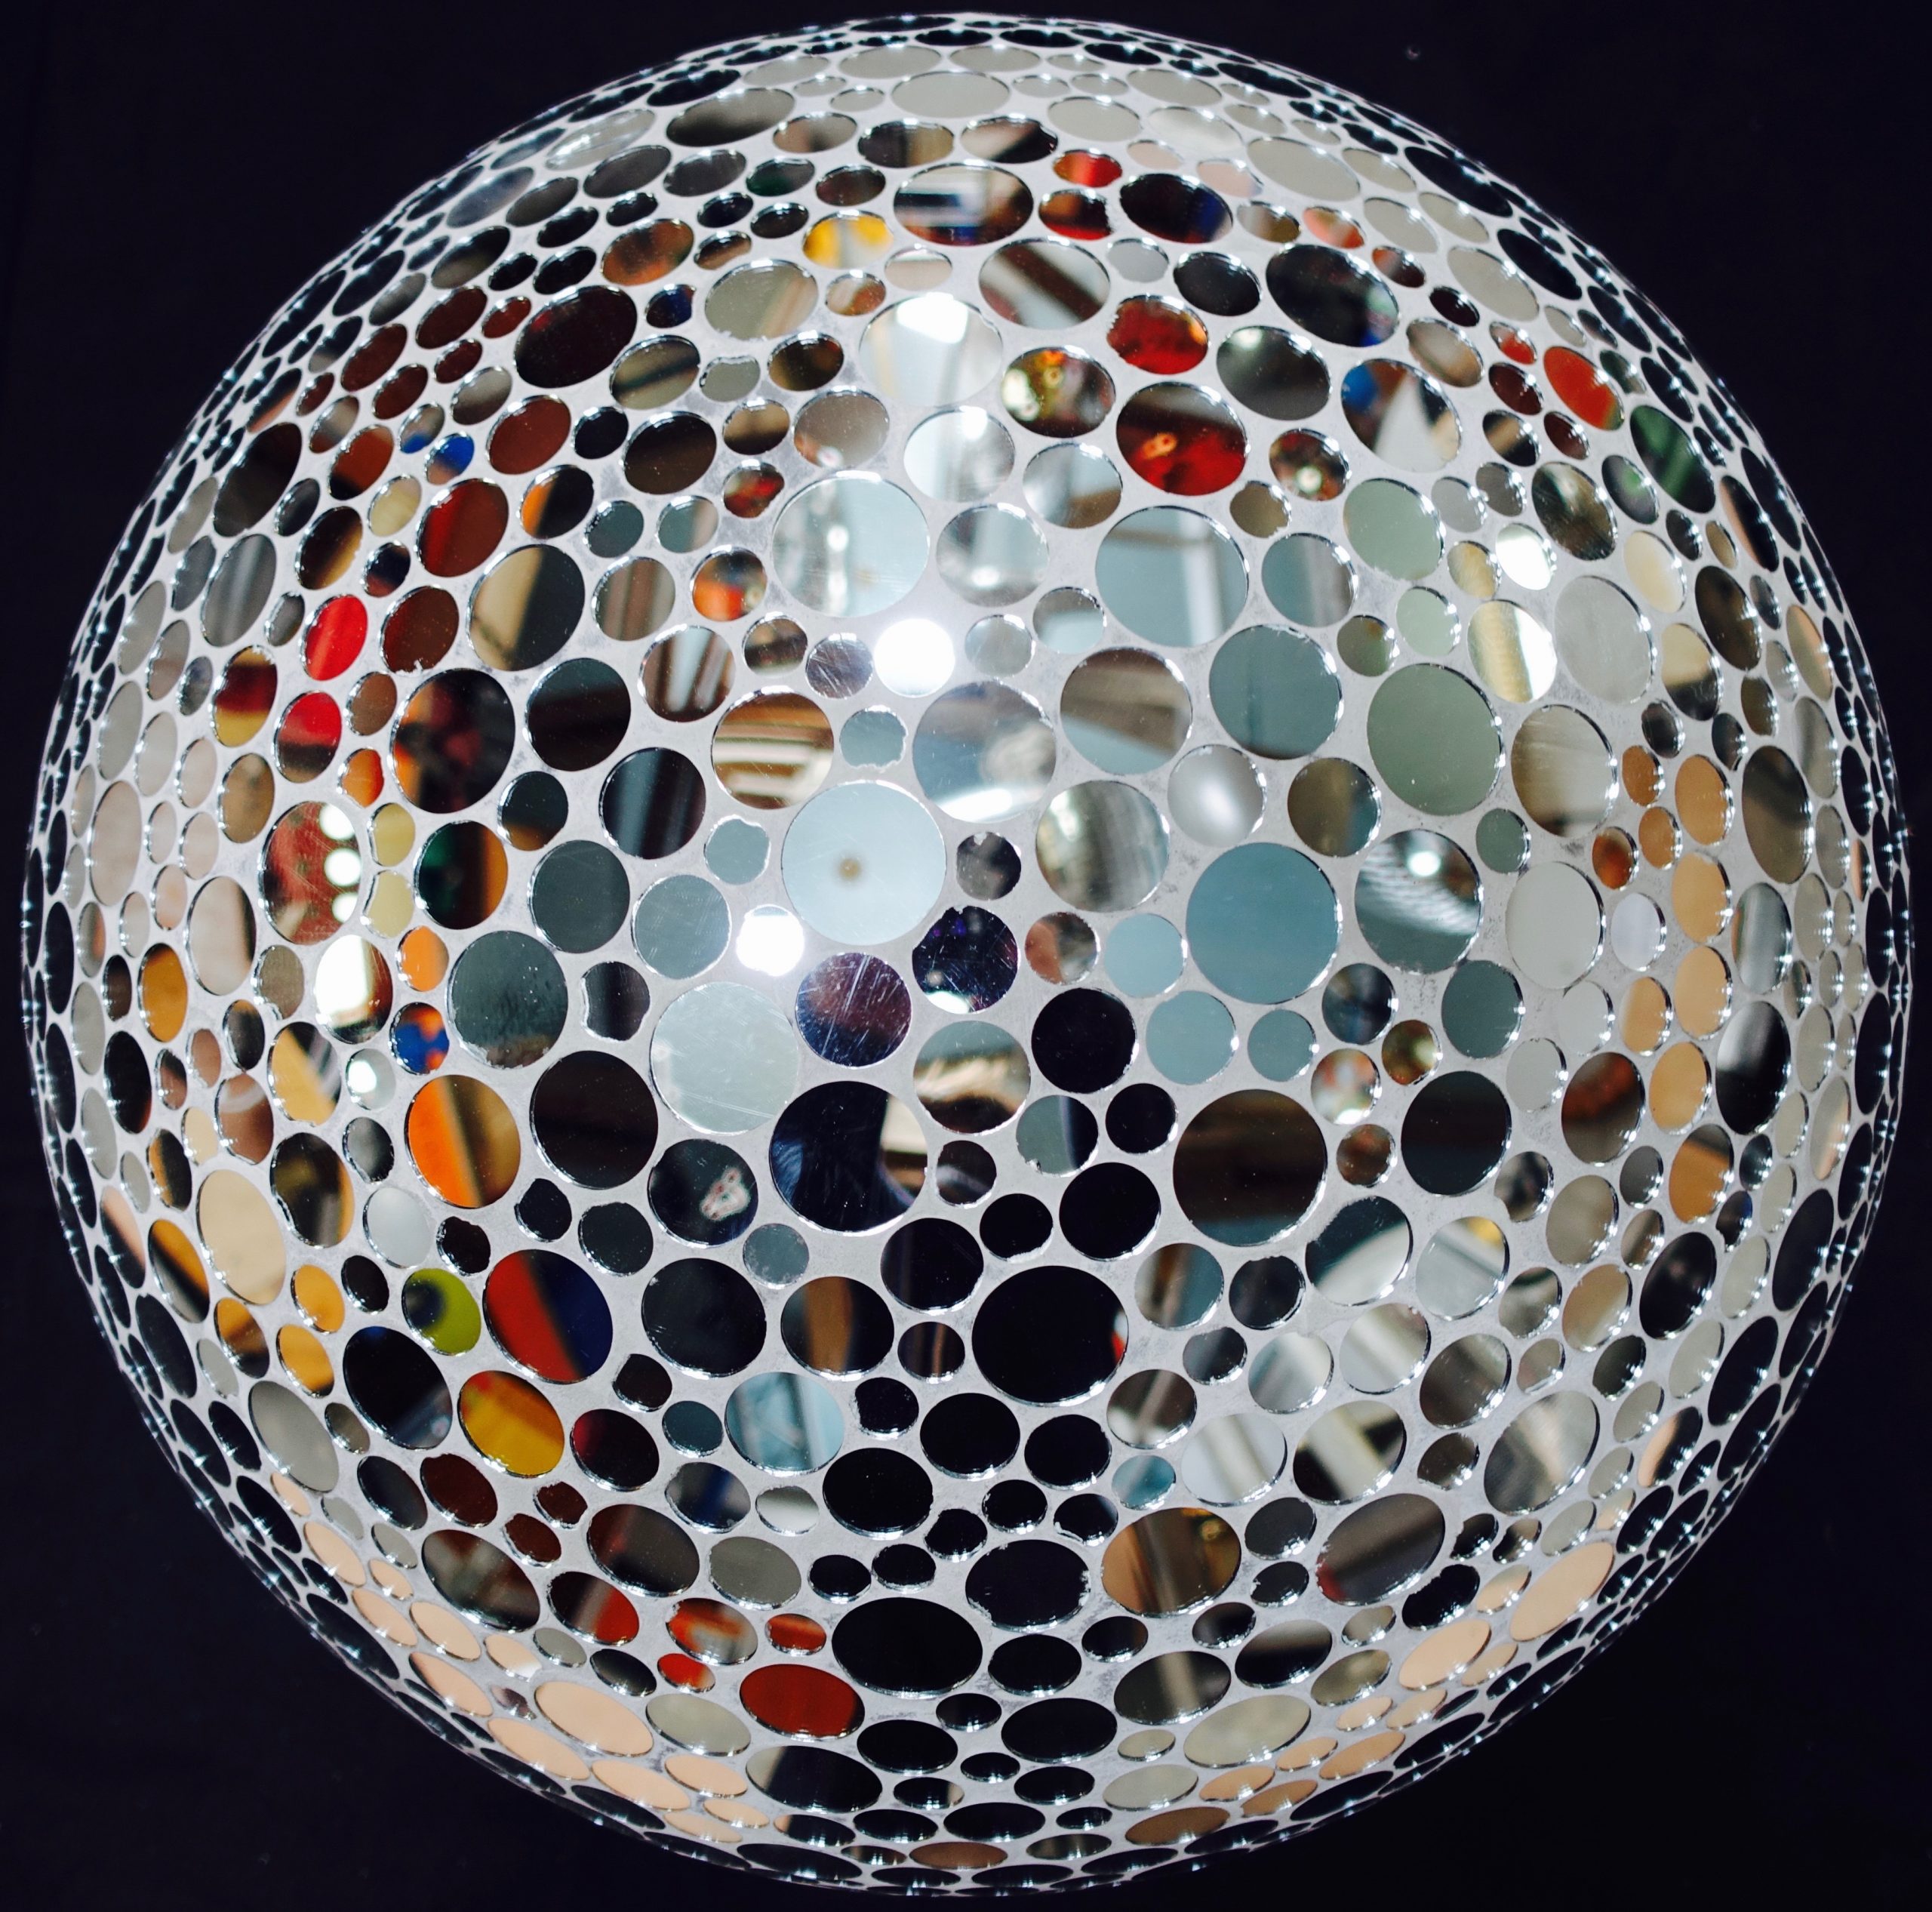 600mm silver disco ball approx weight 10kg dry hire fee - £100 purchase price - POA